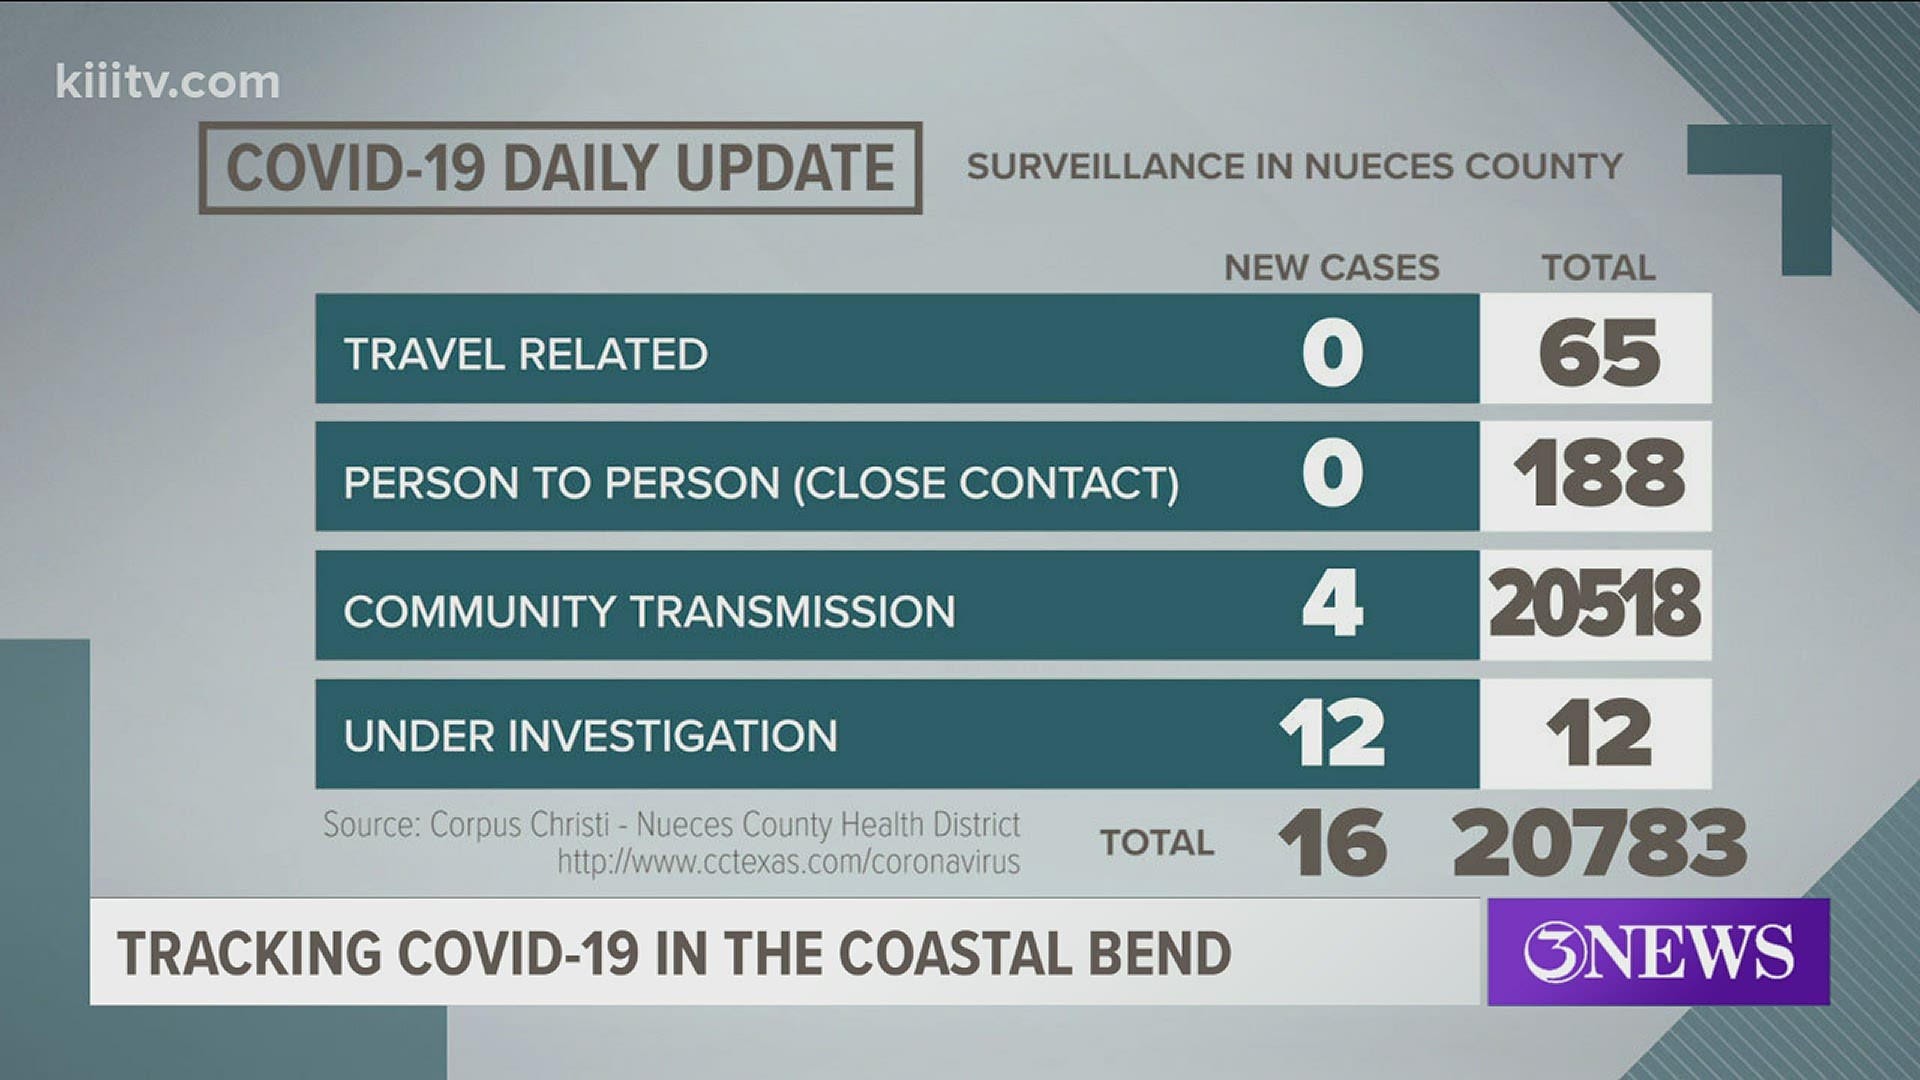 One male and one female died today in Nueces County from coronavirus complications.